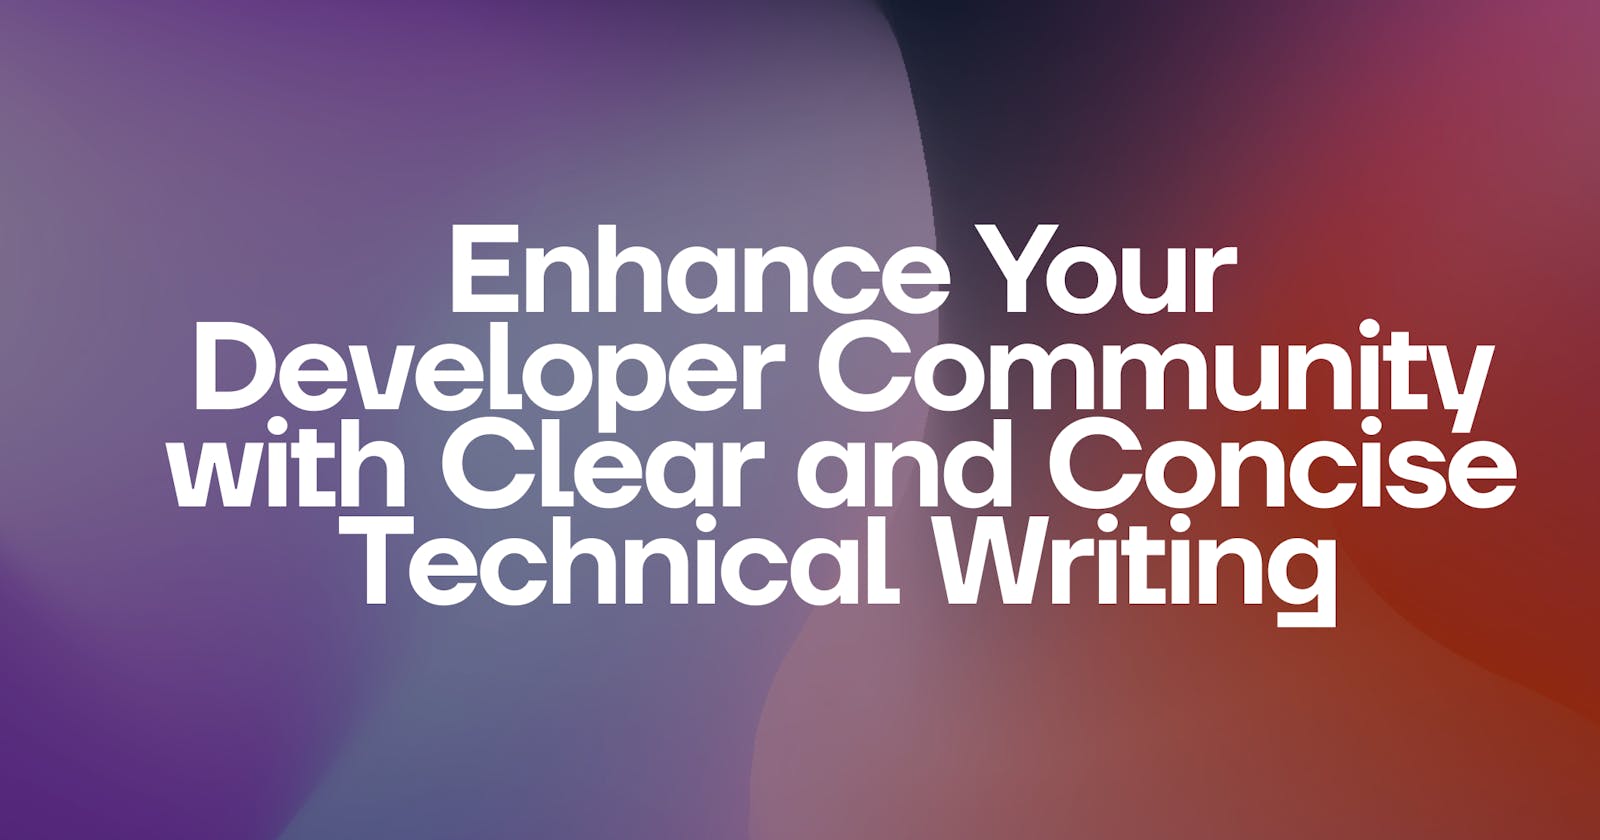 Enhance Your Developer Community with Clear and Concise Technical Writing